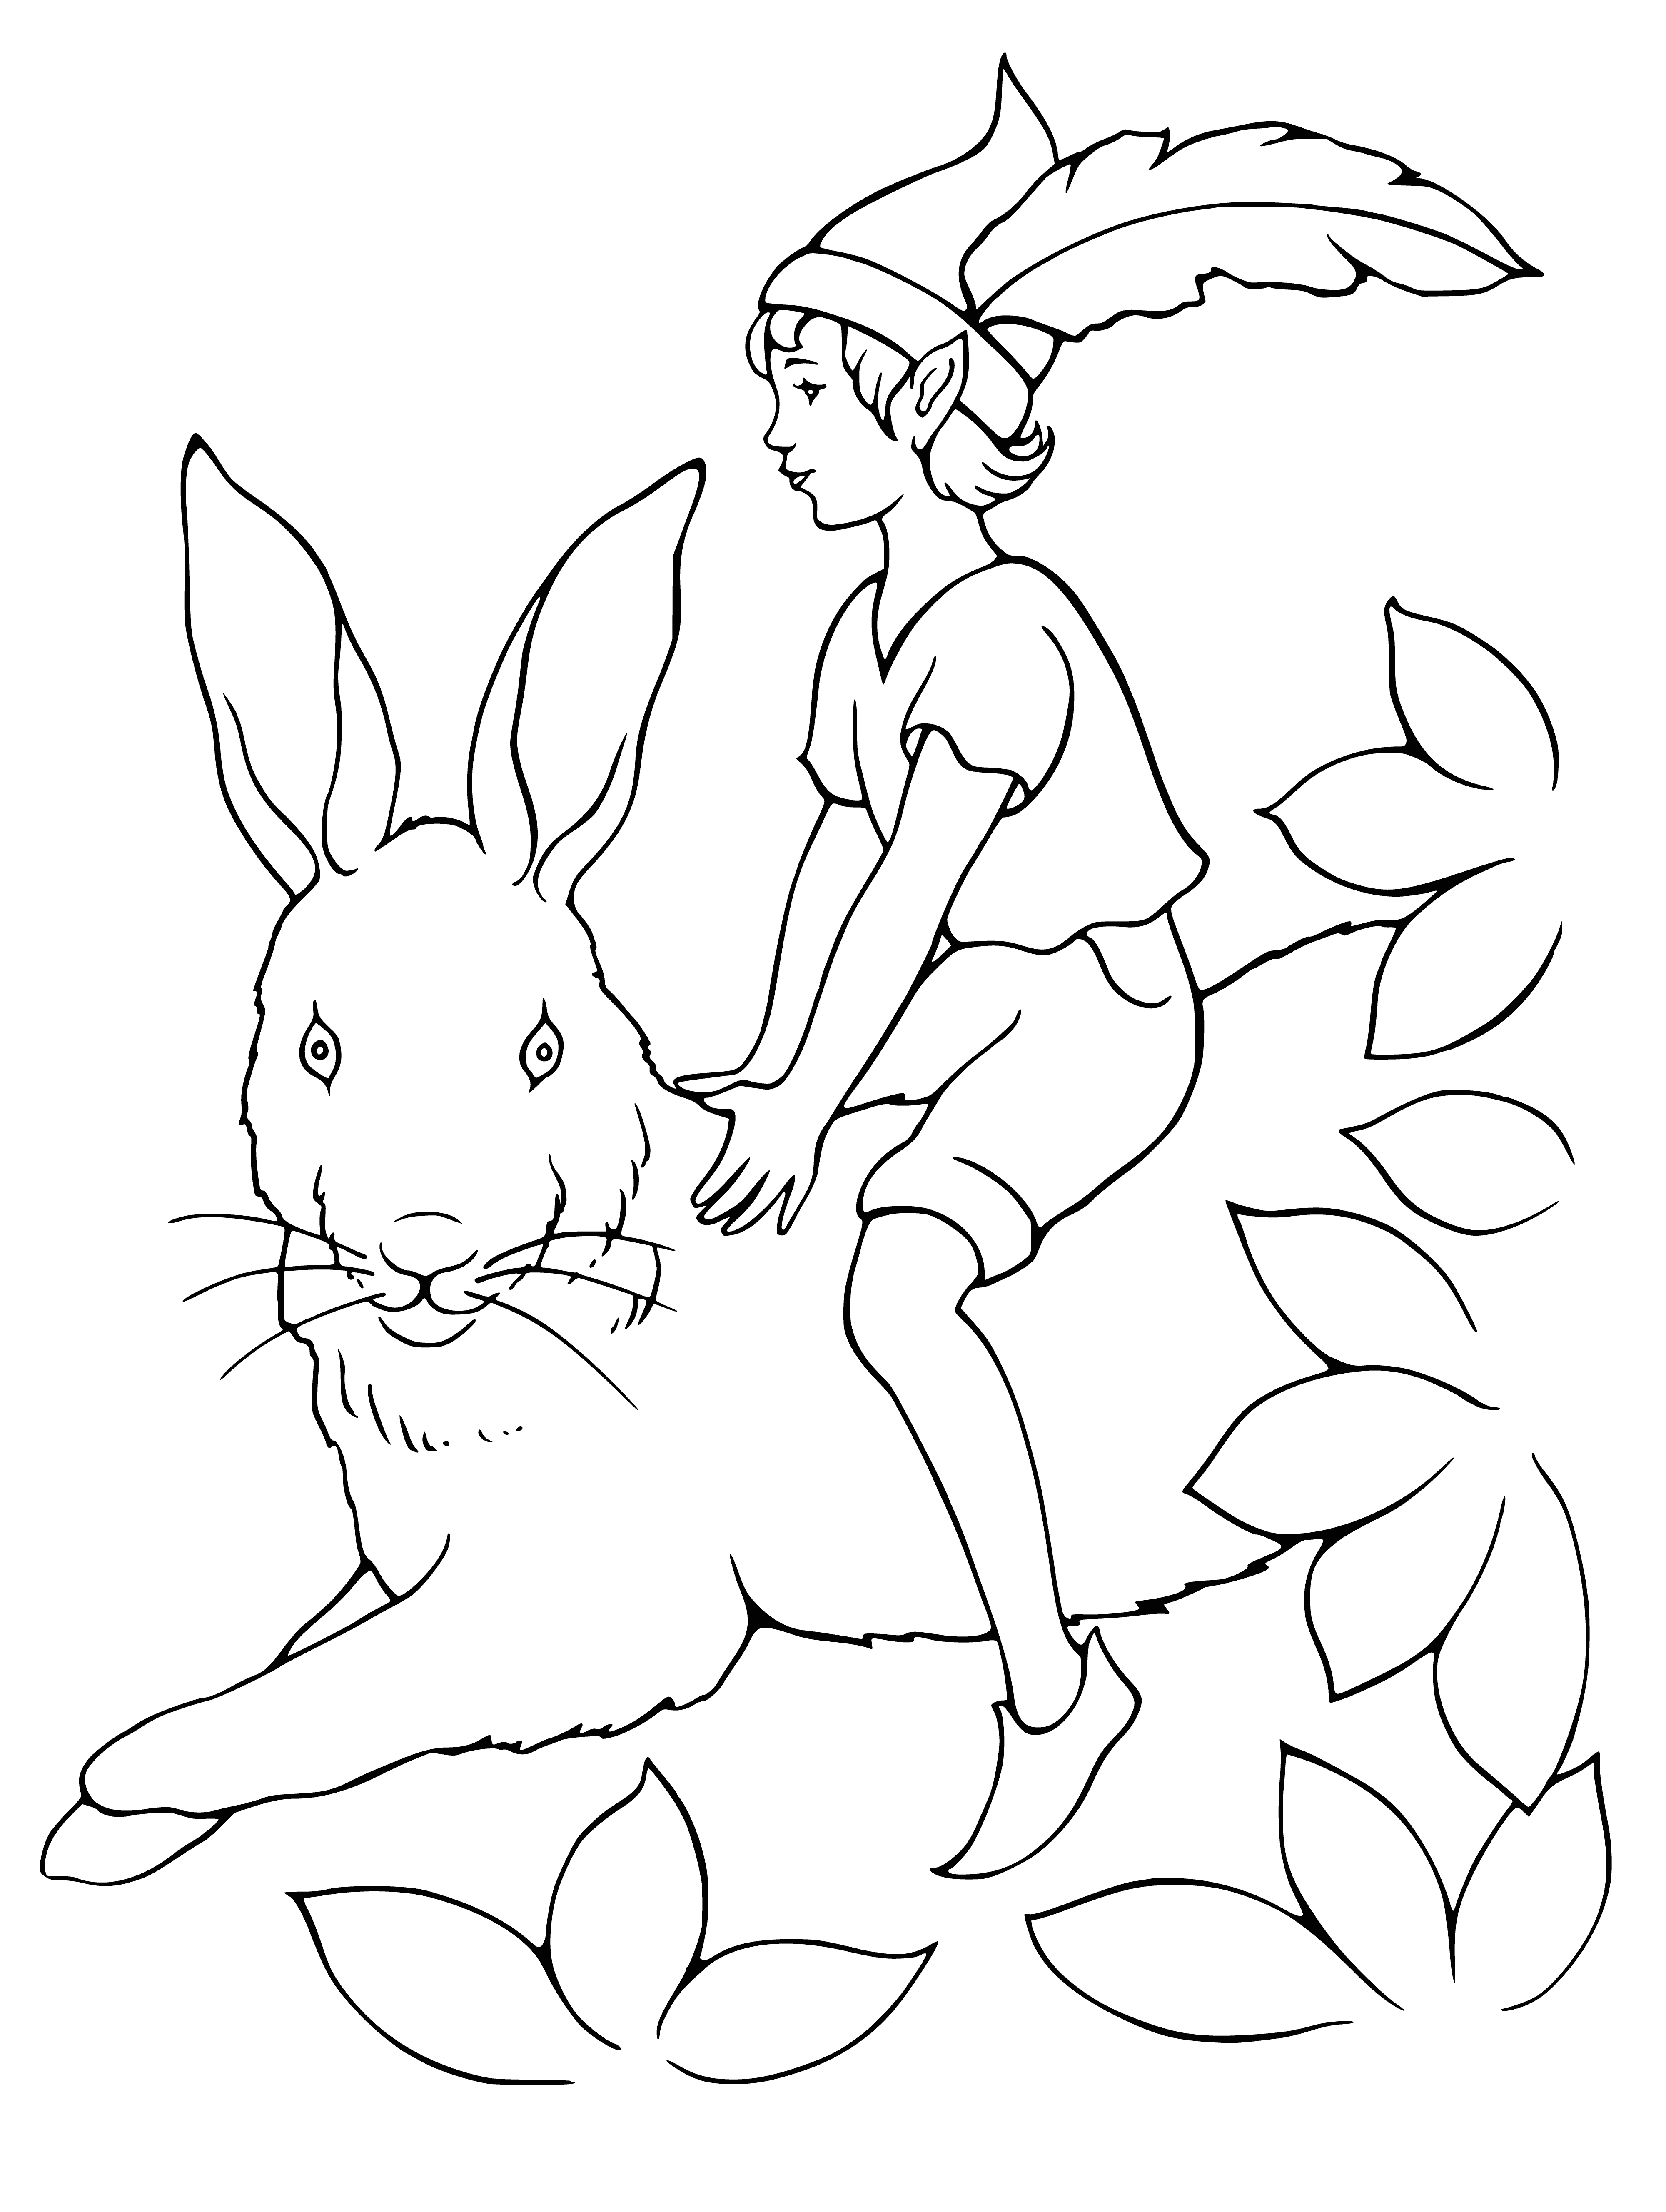 Elf saddled a hare coloring page